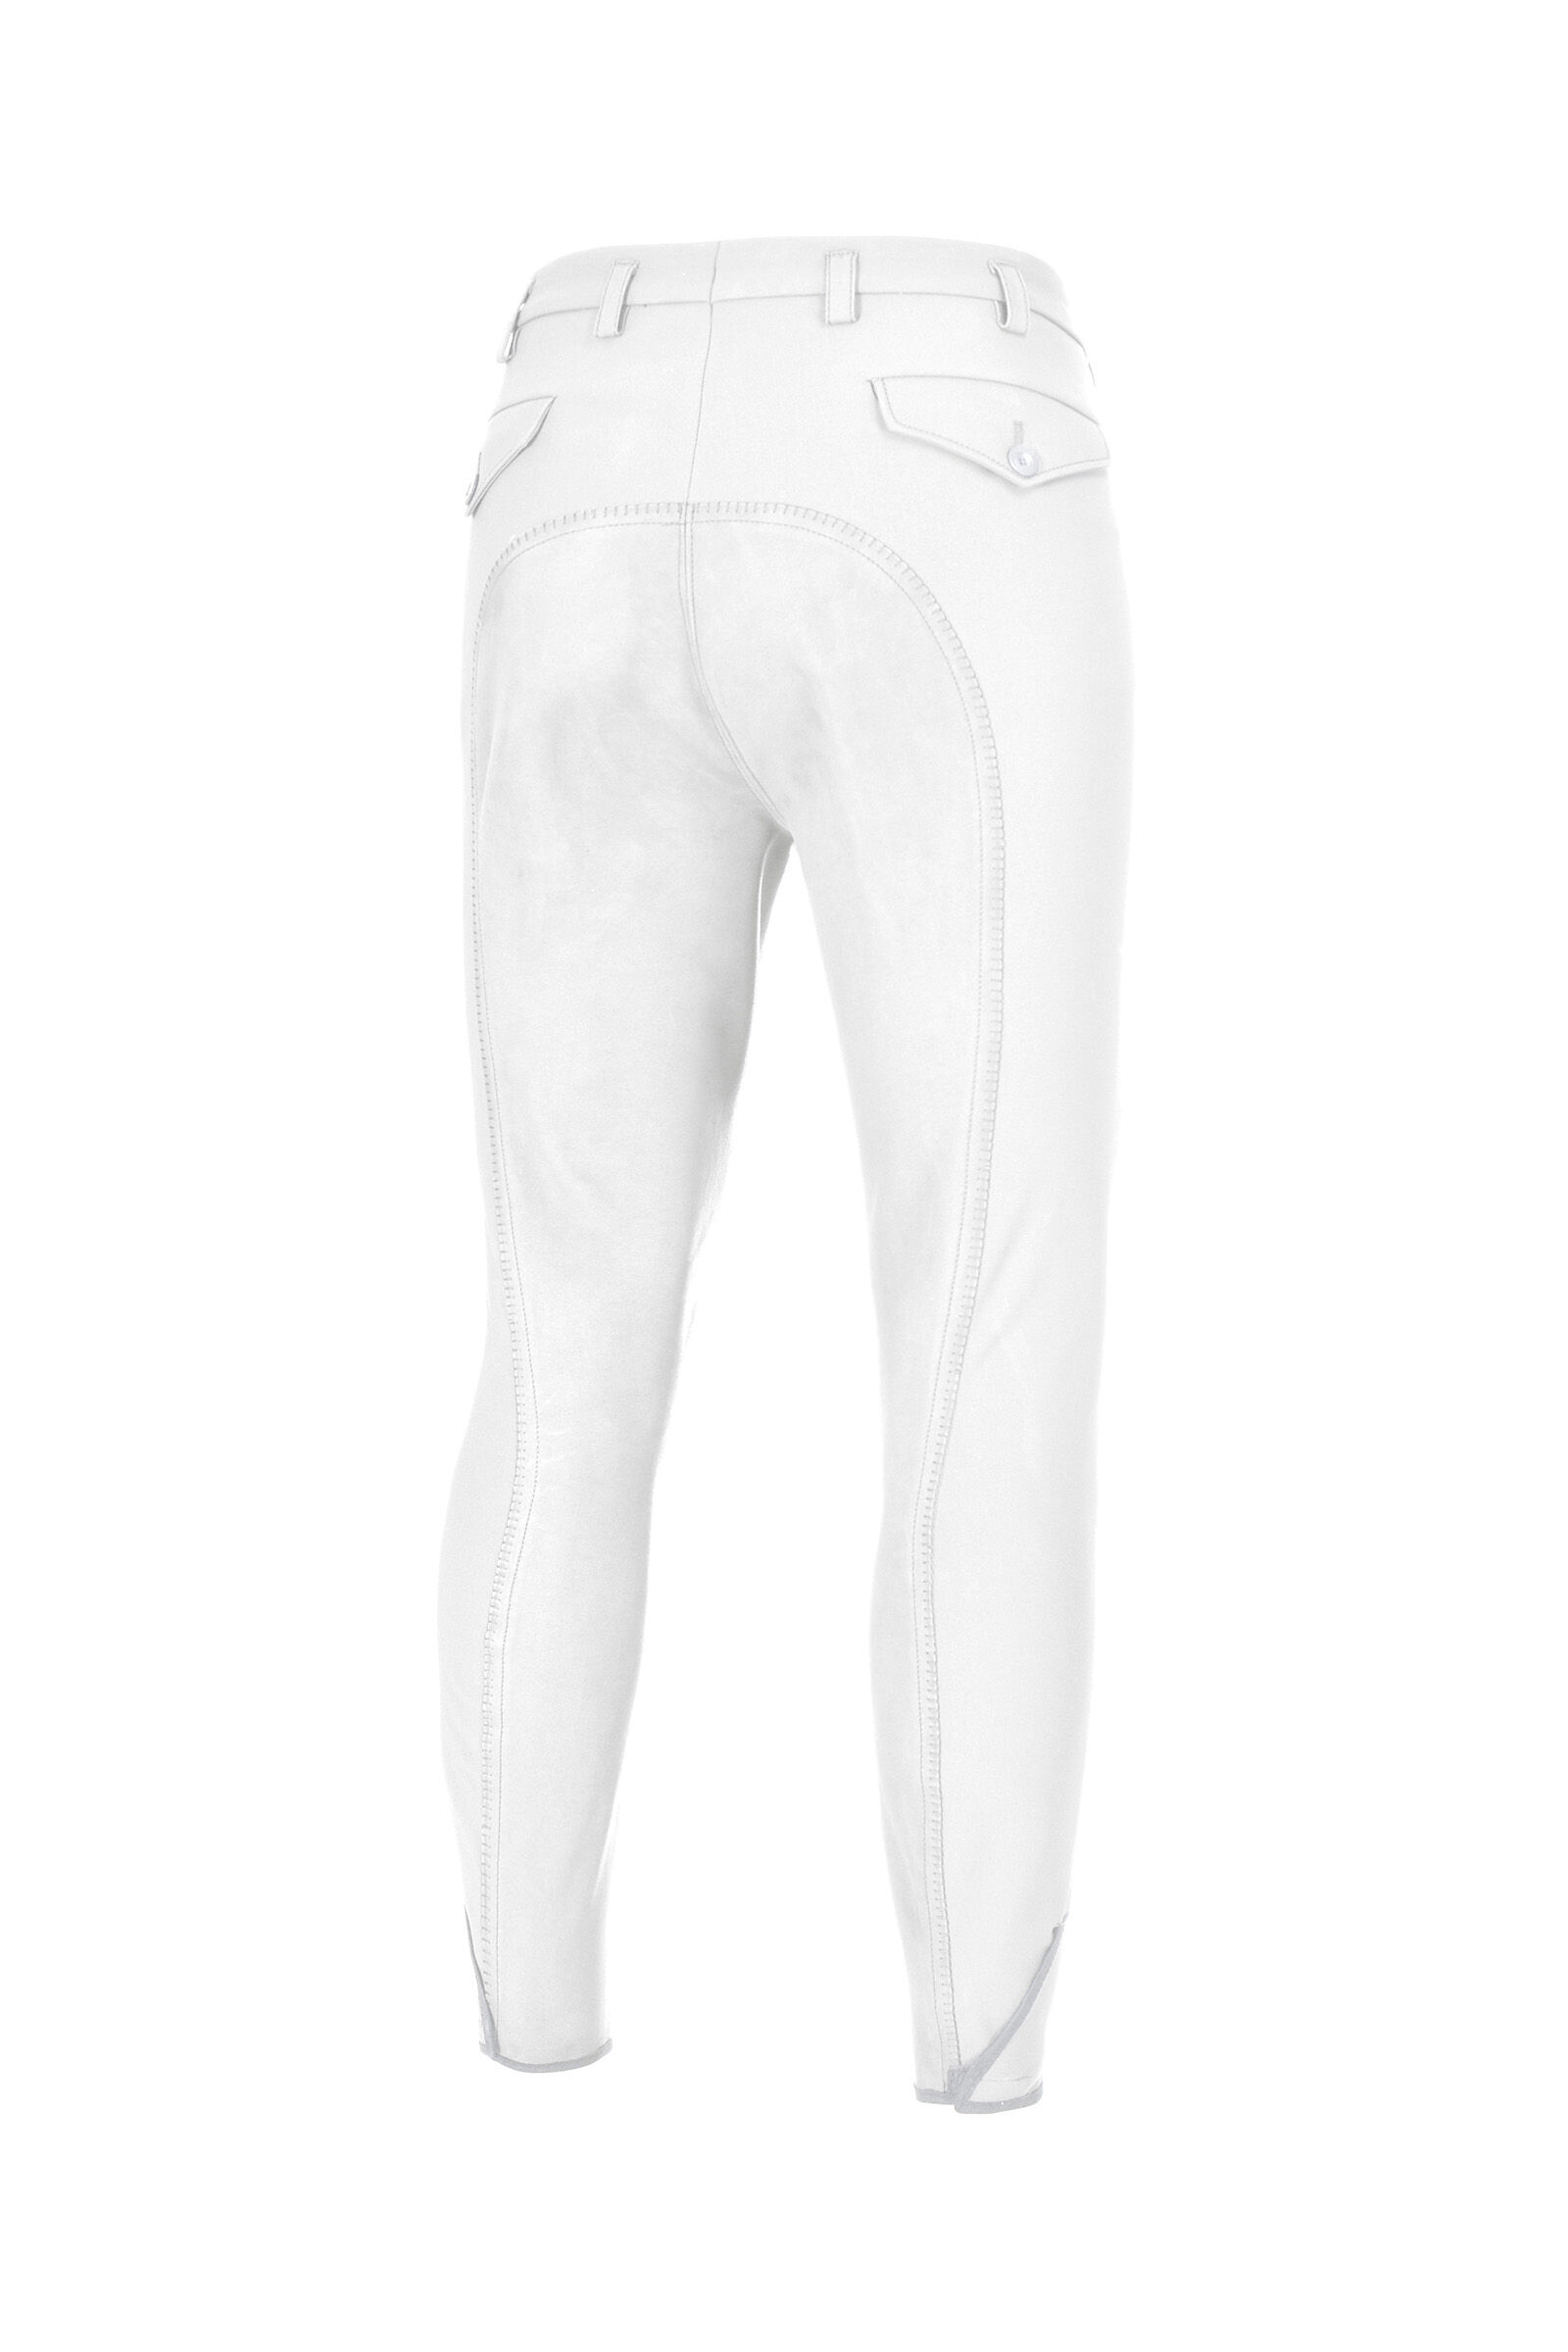 Unveiling Top Riding Jodhpurs, Breeches & Tights at Just Horse Riders!